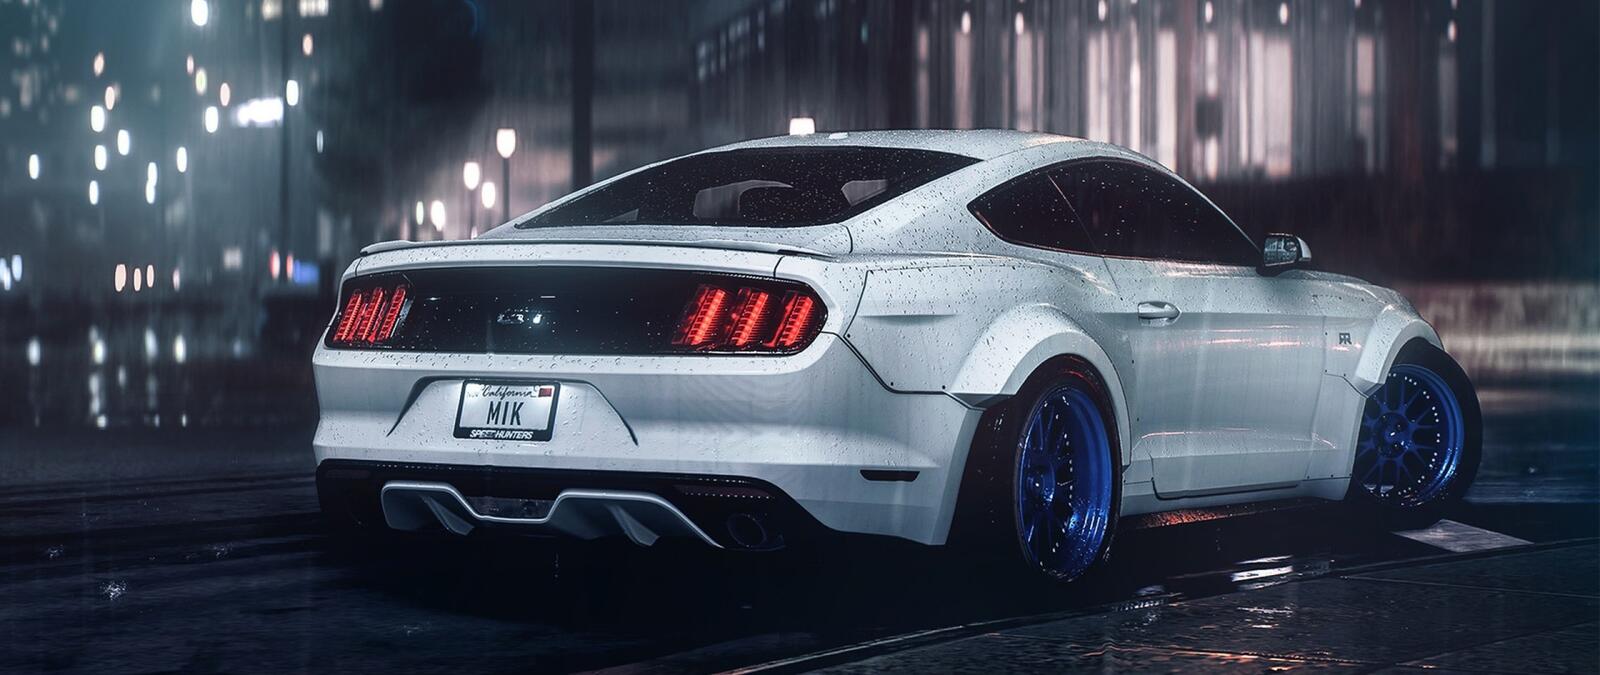 Free photo A white Ford Mustang in rainy weather